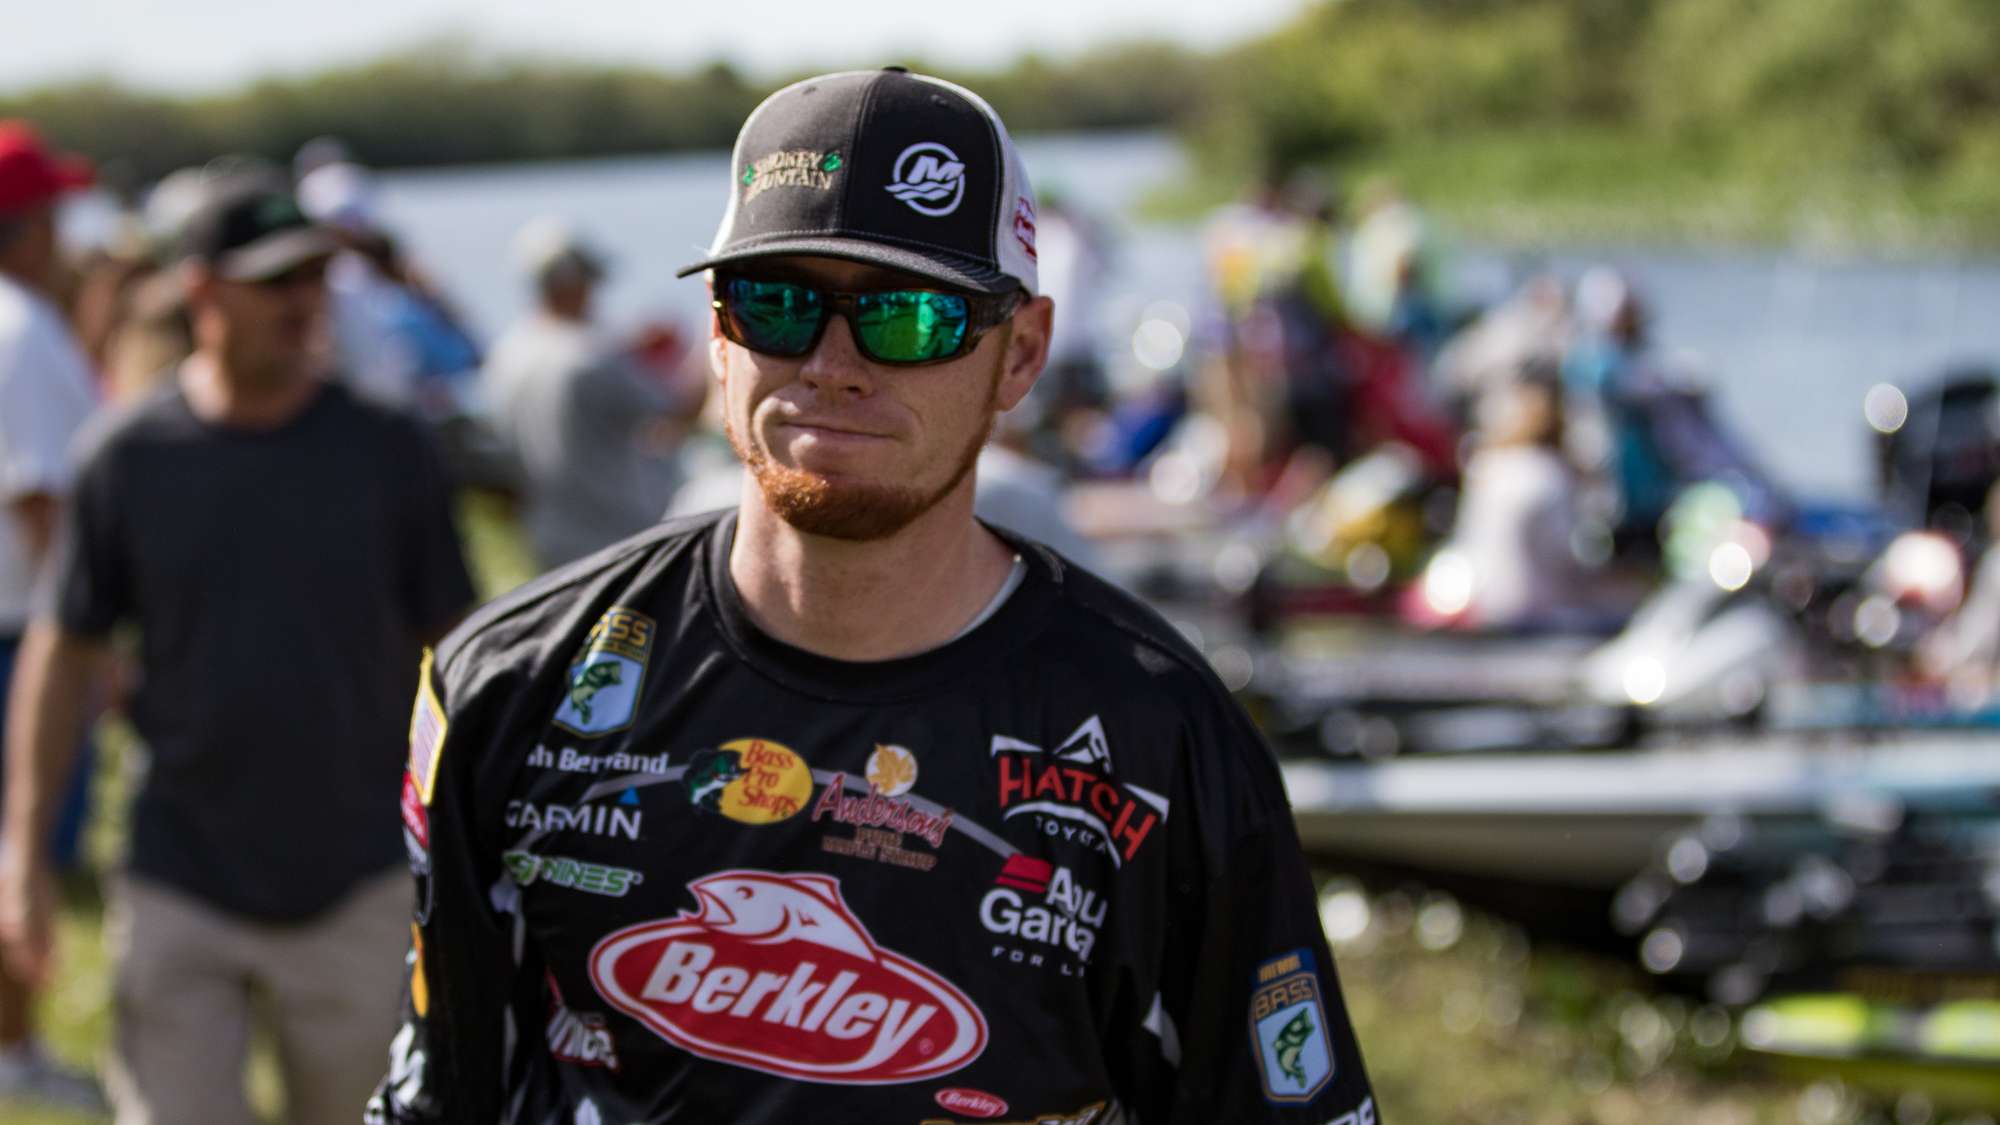 As the time to begin draws near, anglers start appearing backstage, like Josh Bertrand.
